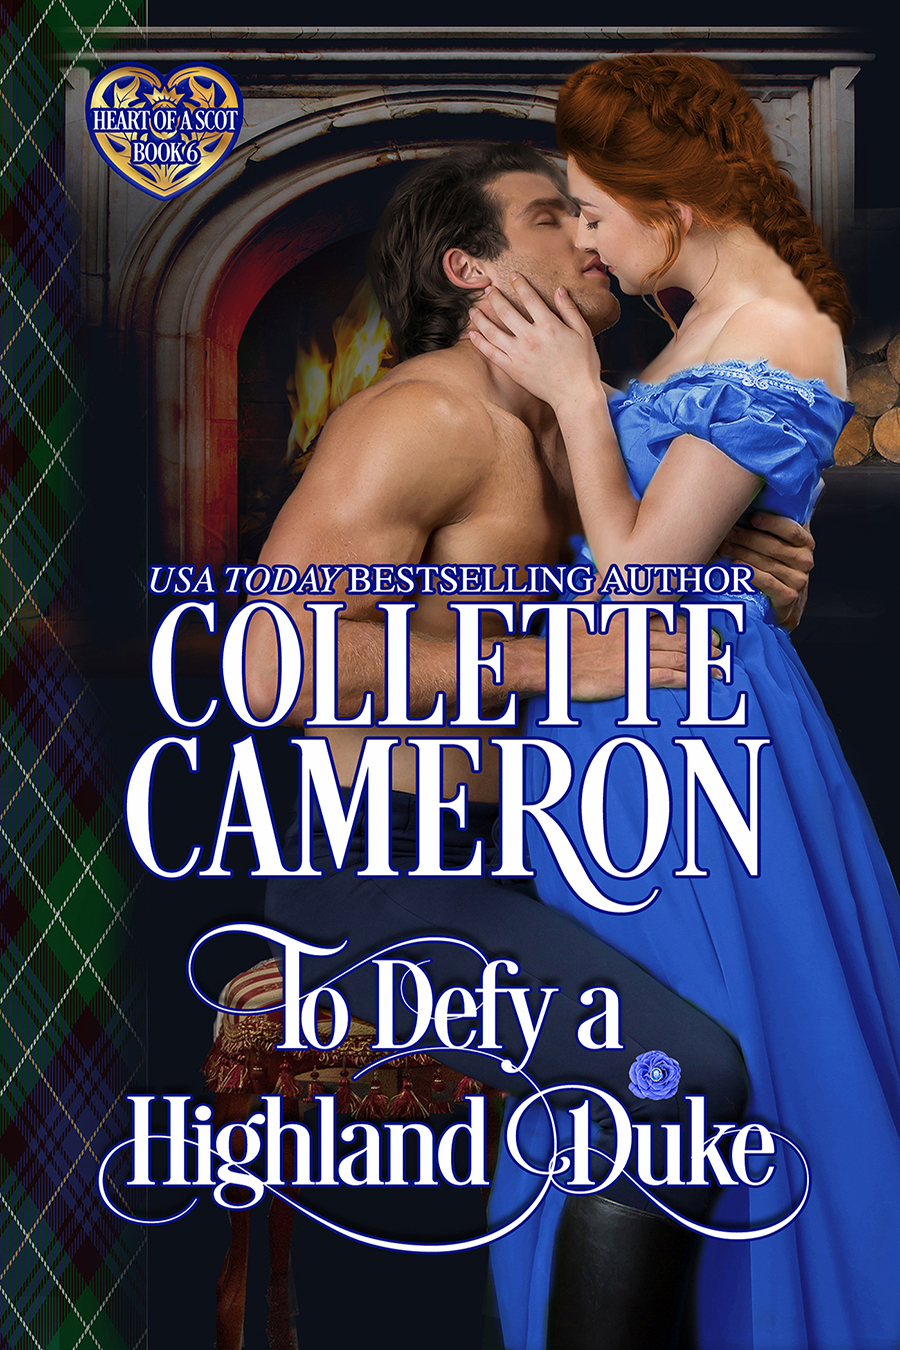 Heart of a Scot Special: a FREE book and a 99¢ sale!